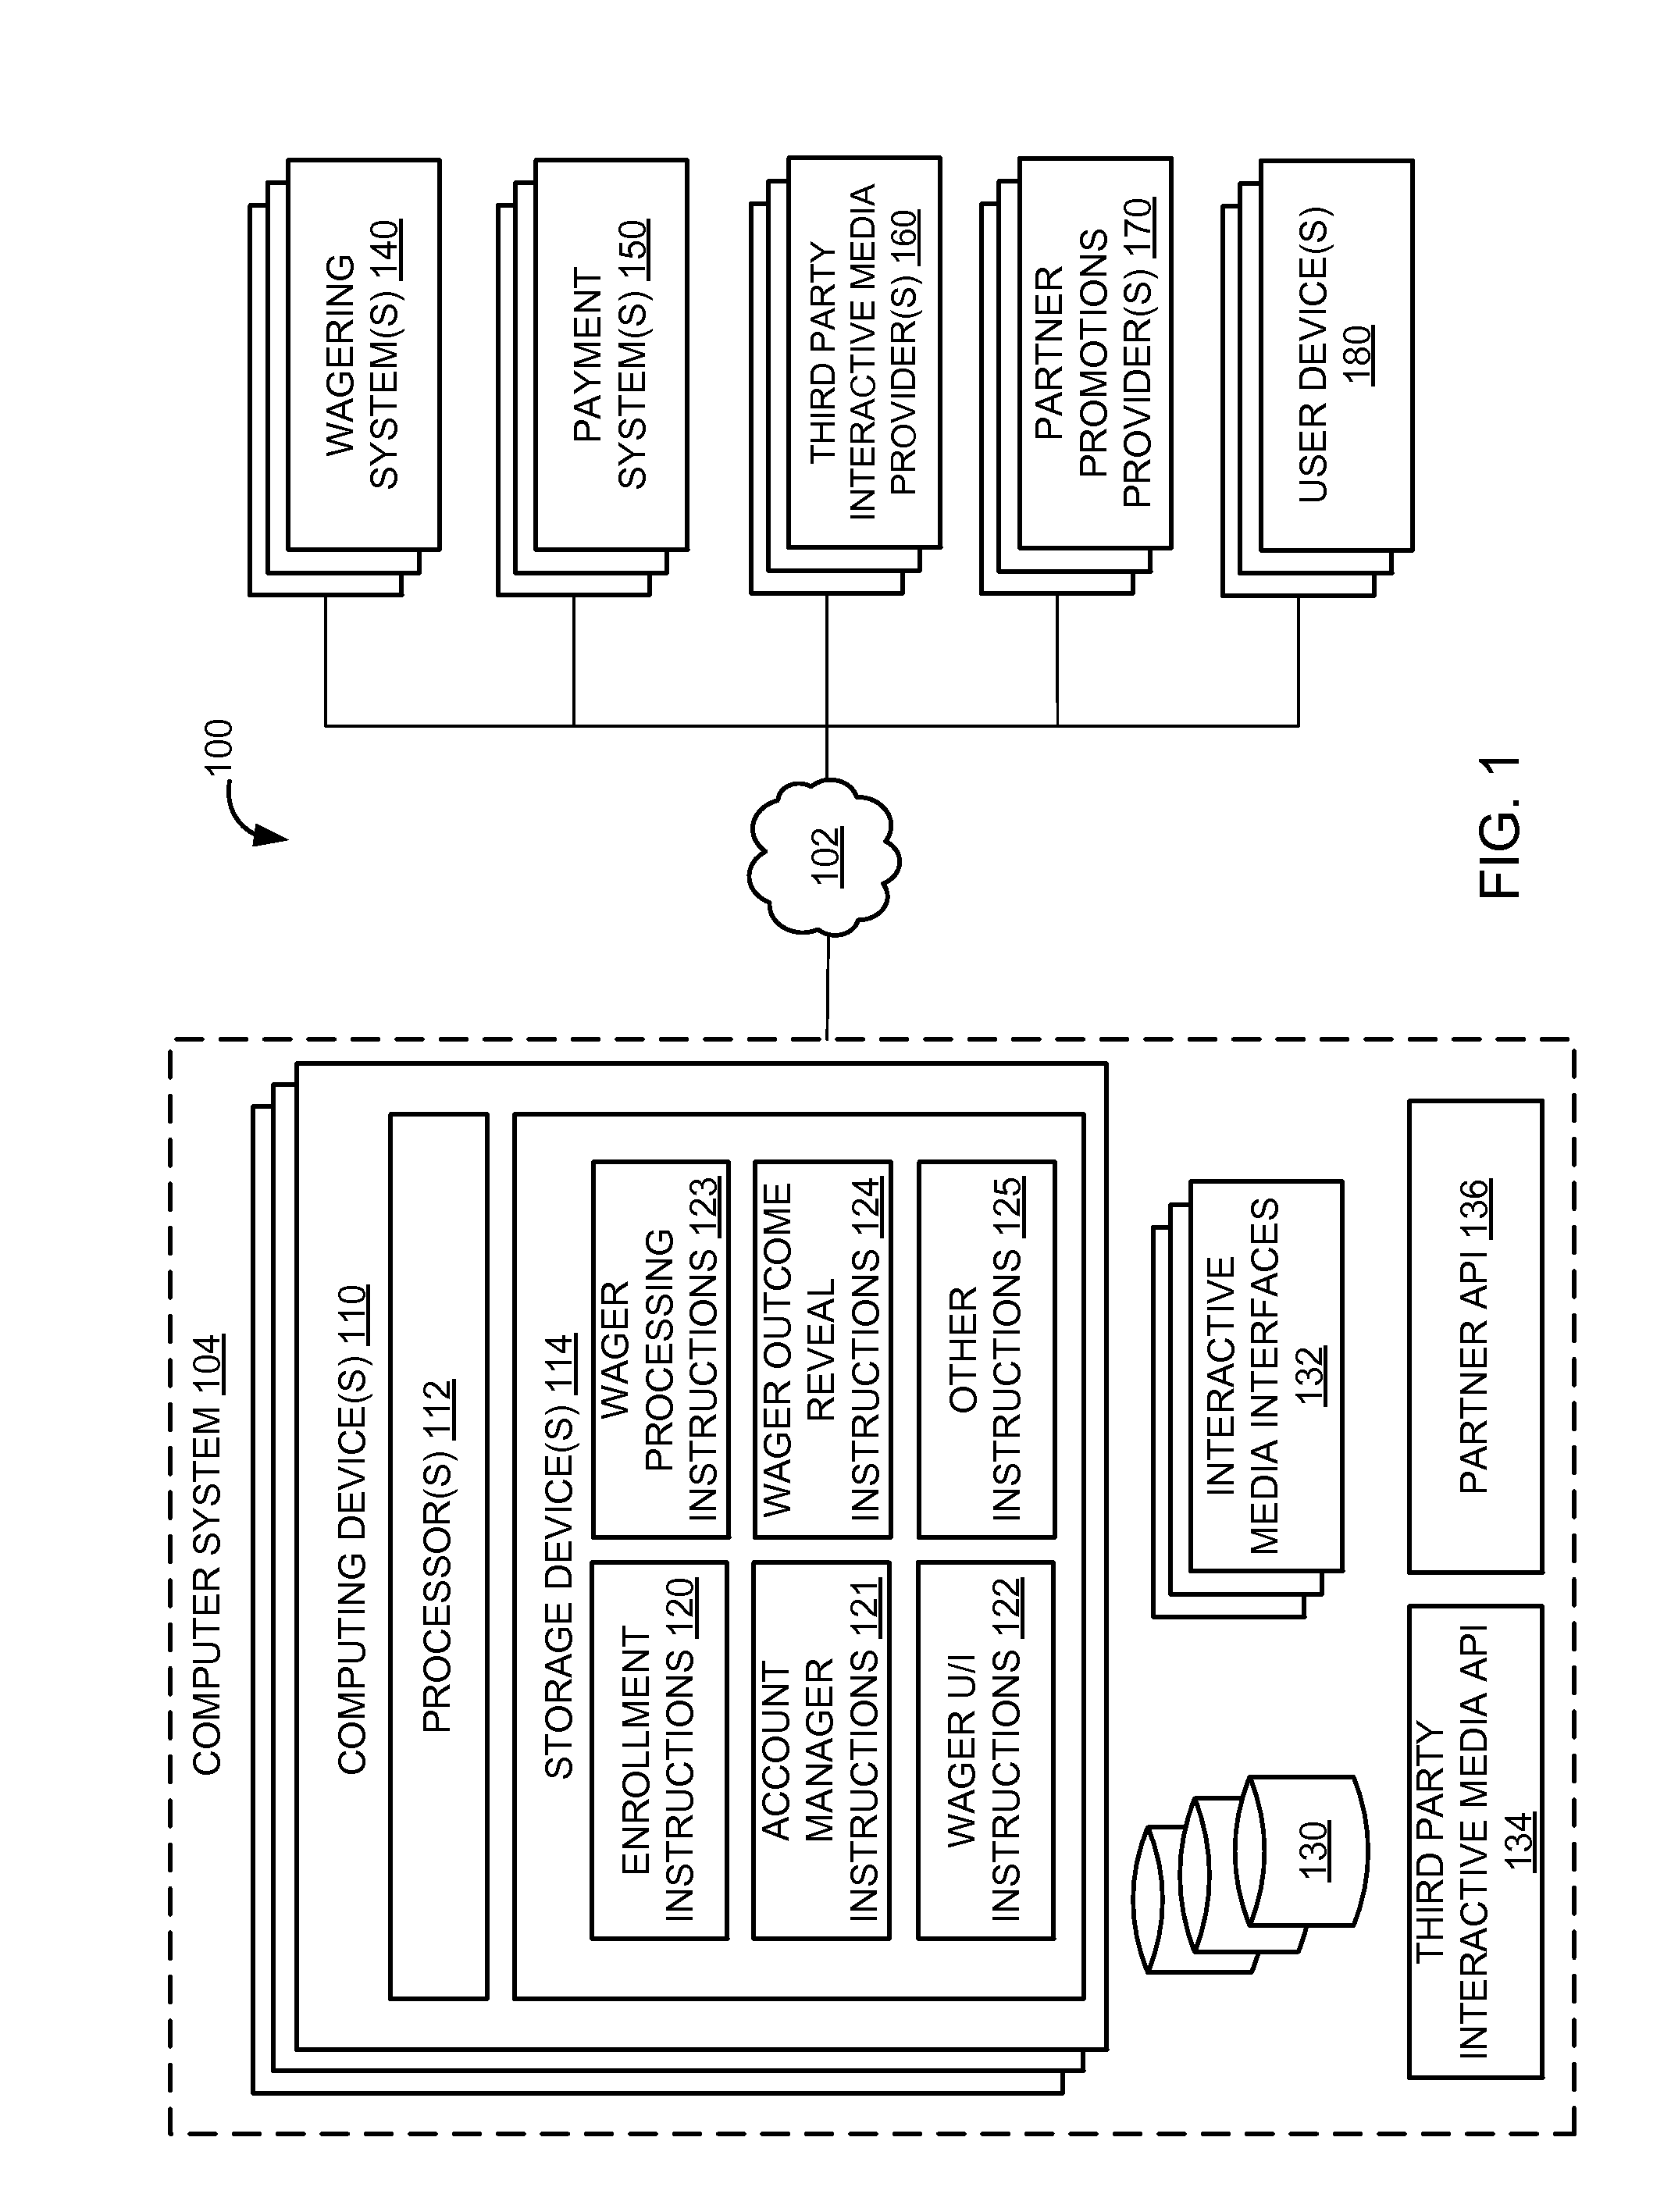 System and Method of Providing Wagering Opportunities Based on External Triggers